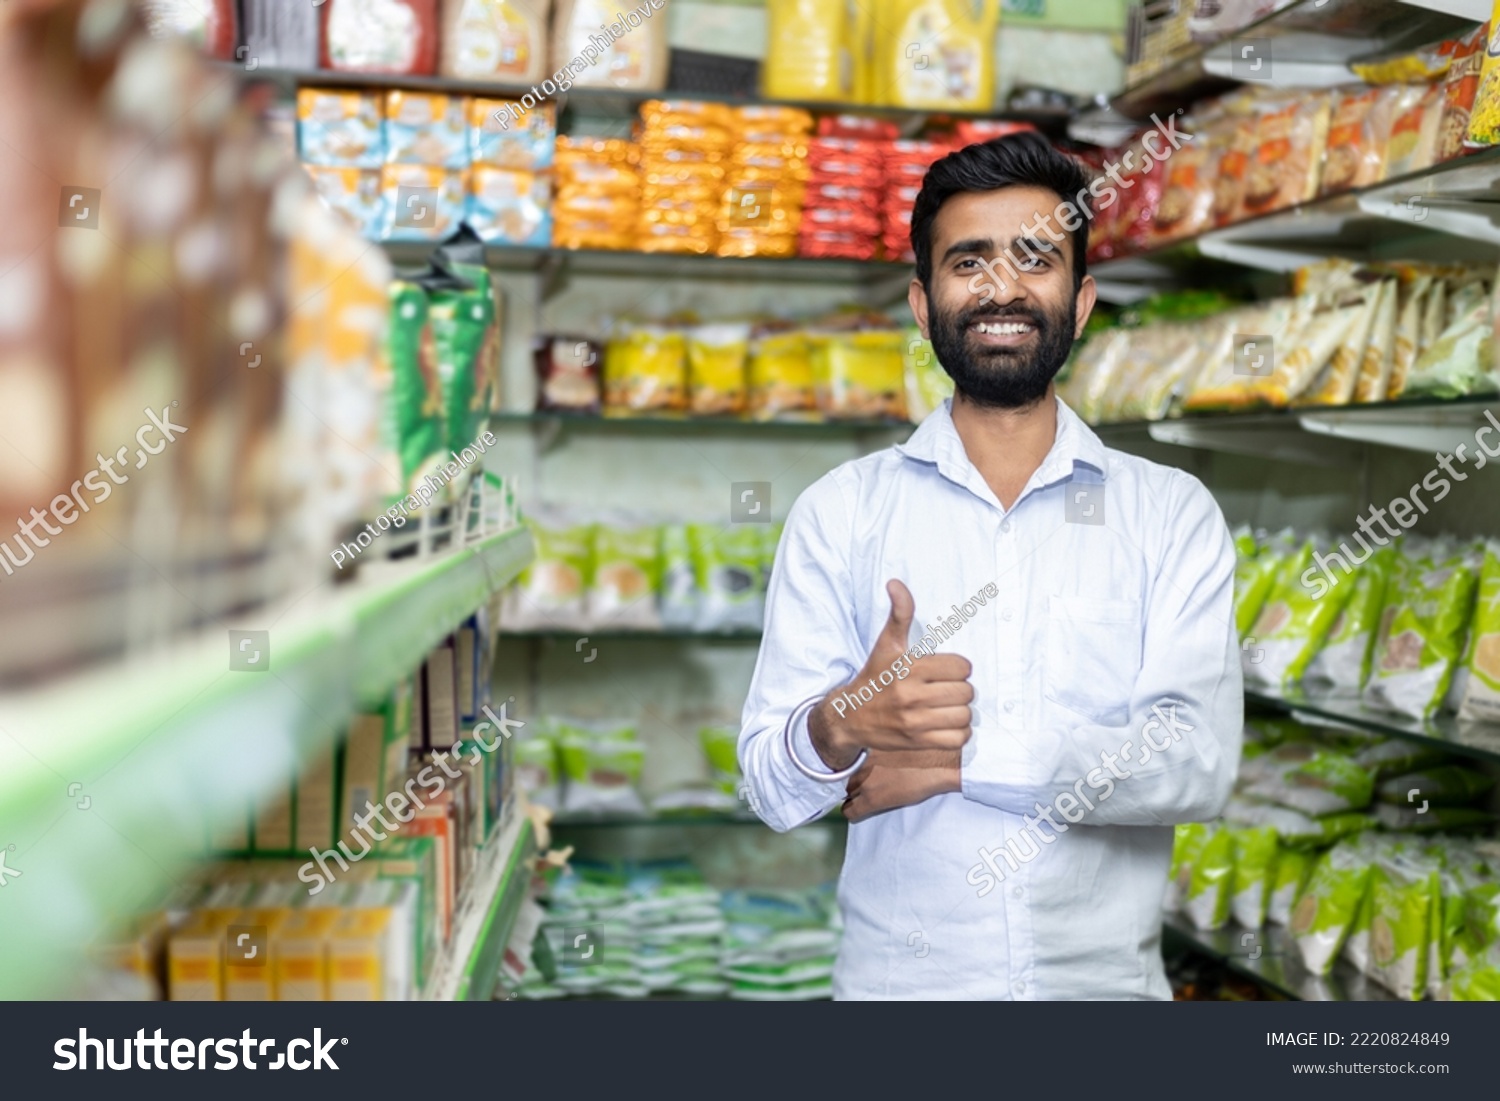 Indian shop keeper in Grocery store showing thumbs up #2220824849